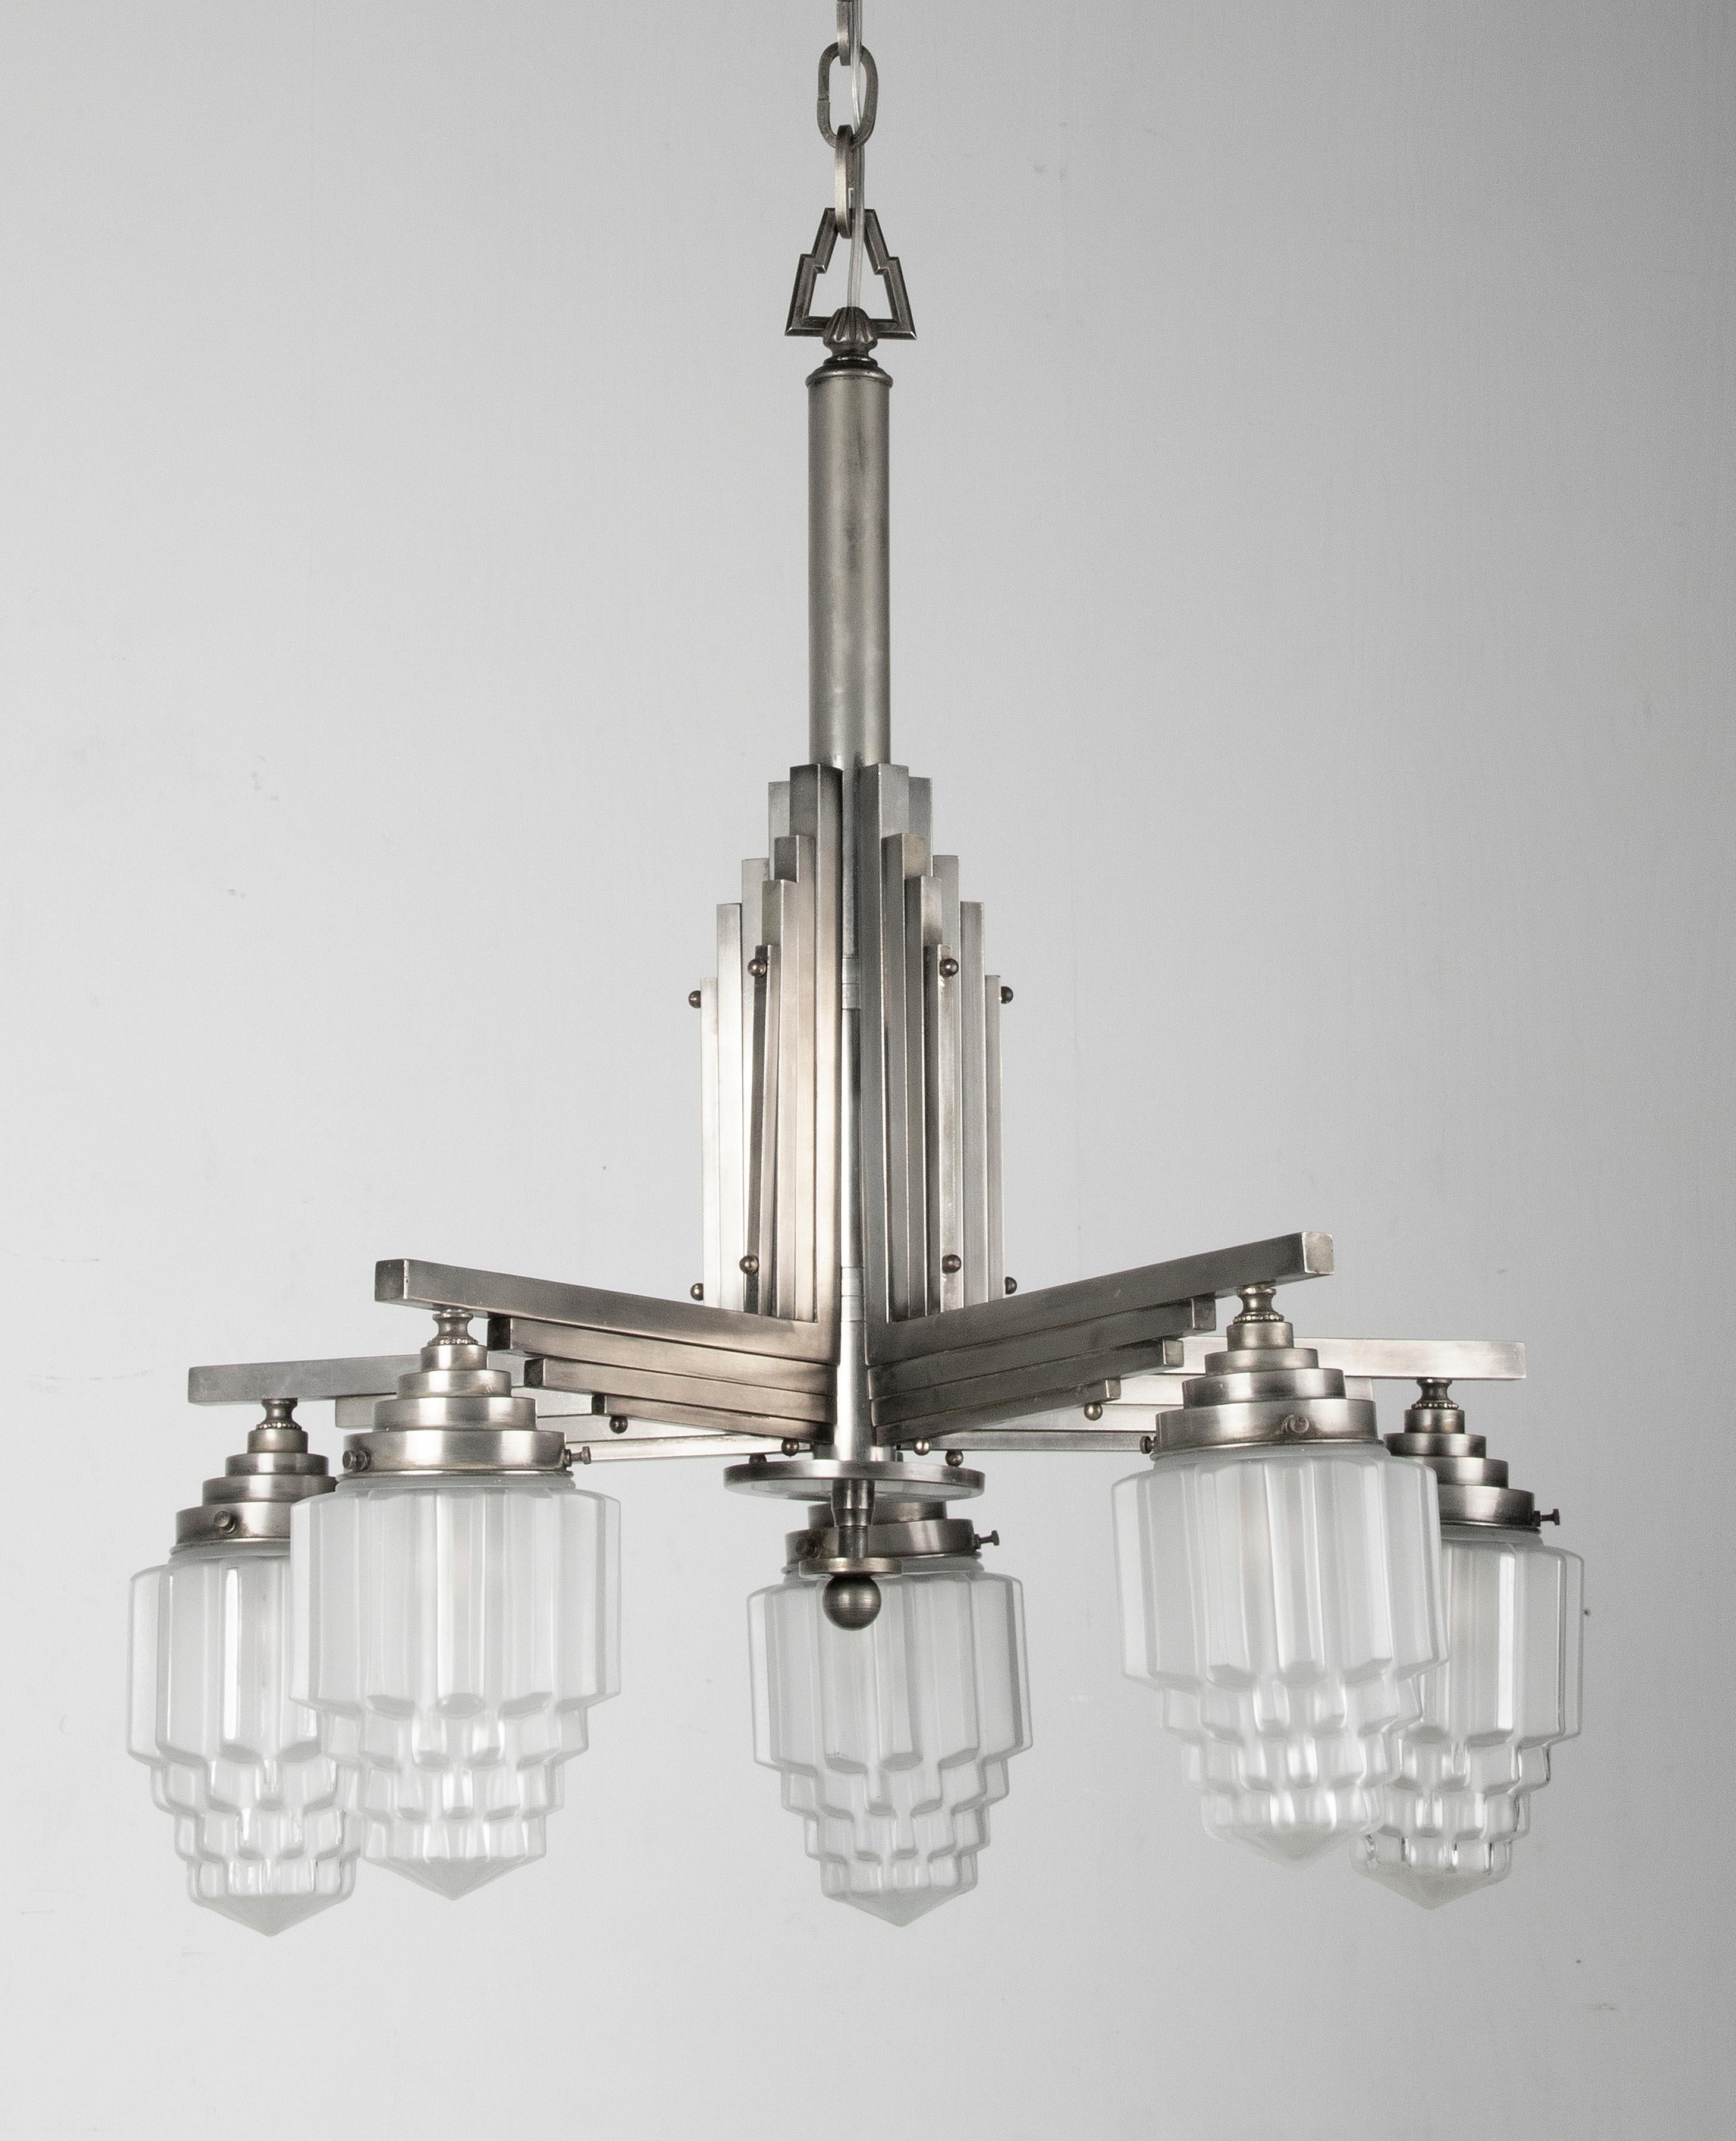 An Art Deco period Skyscraper chandelier made off metal. The molded frosted satin glass shades are also called Skyscraper model. The design is inspired by the Art Deco architecture, like the Empire State Building. The lamp has 5 light points with